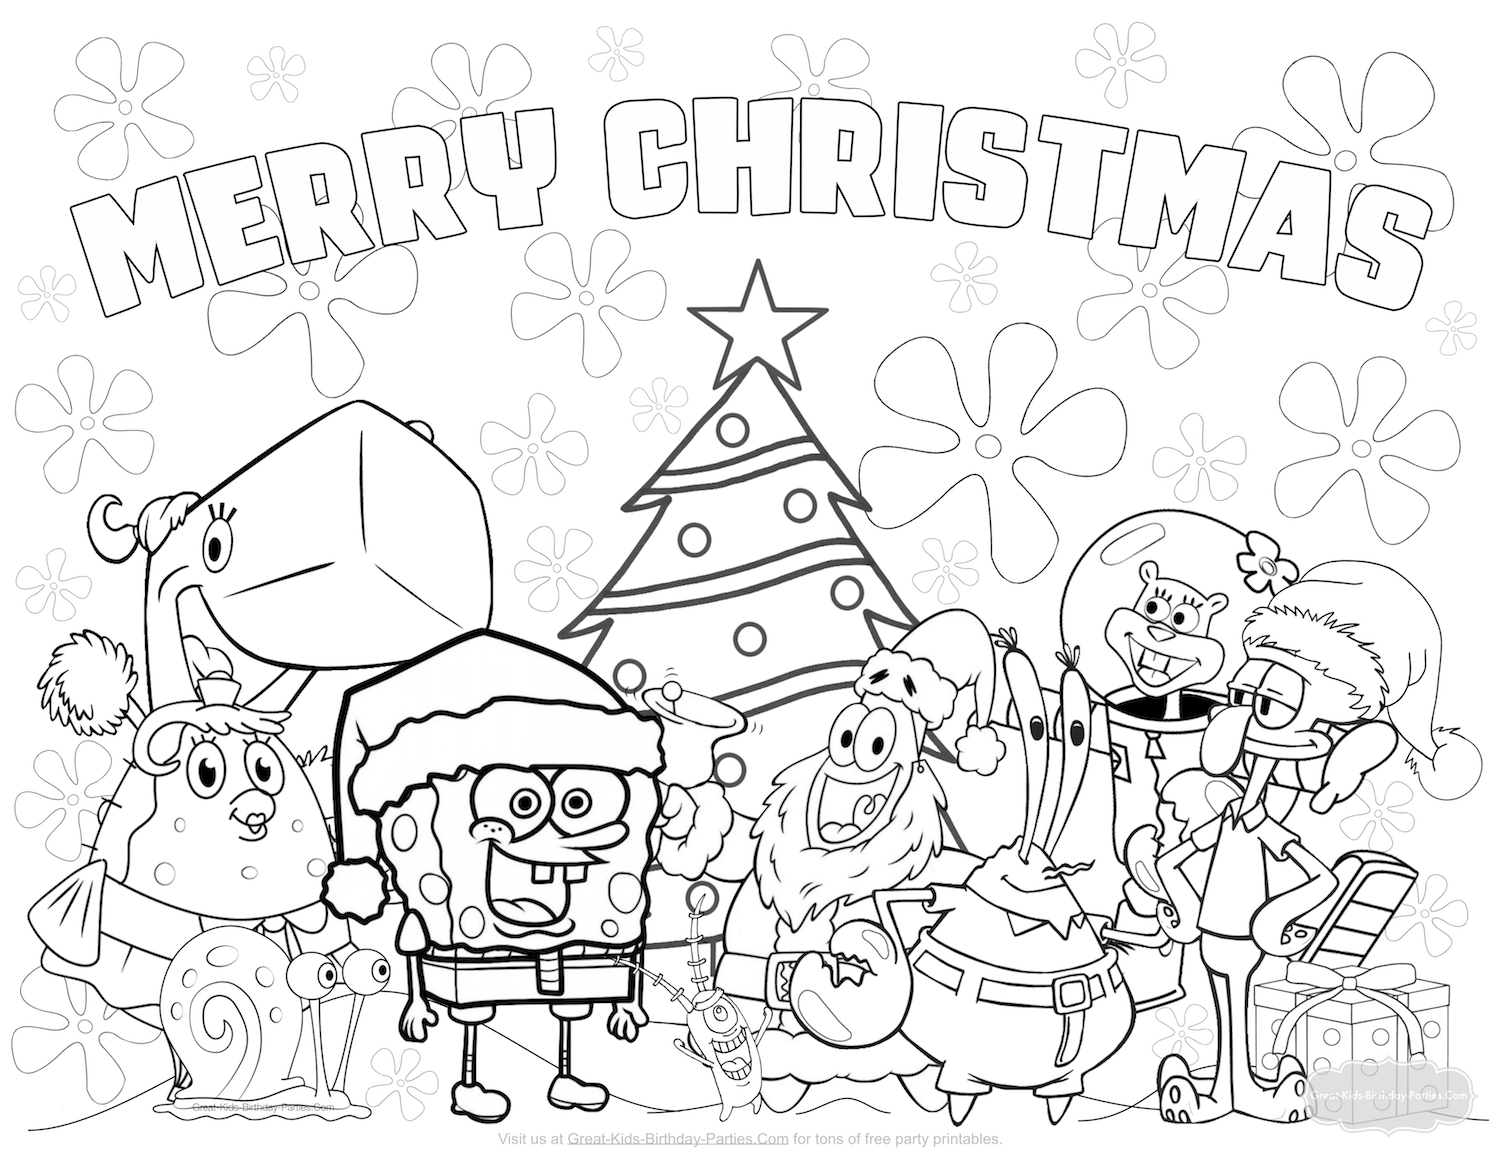 Spend Christmas with Spongebob & Friends this season with our new Spongebob Christmas coloring page To right click and save to your puter